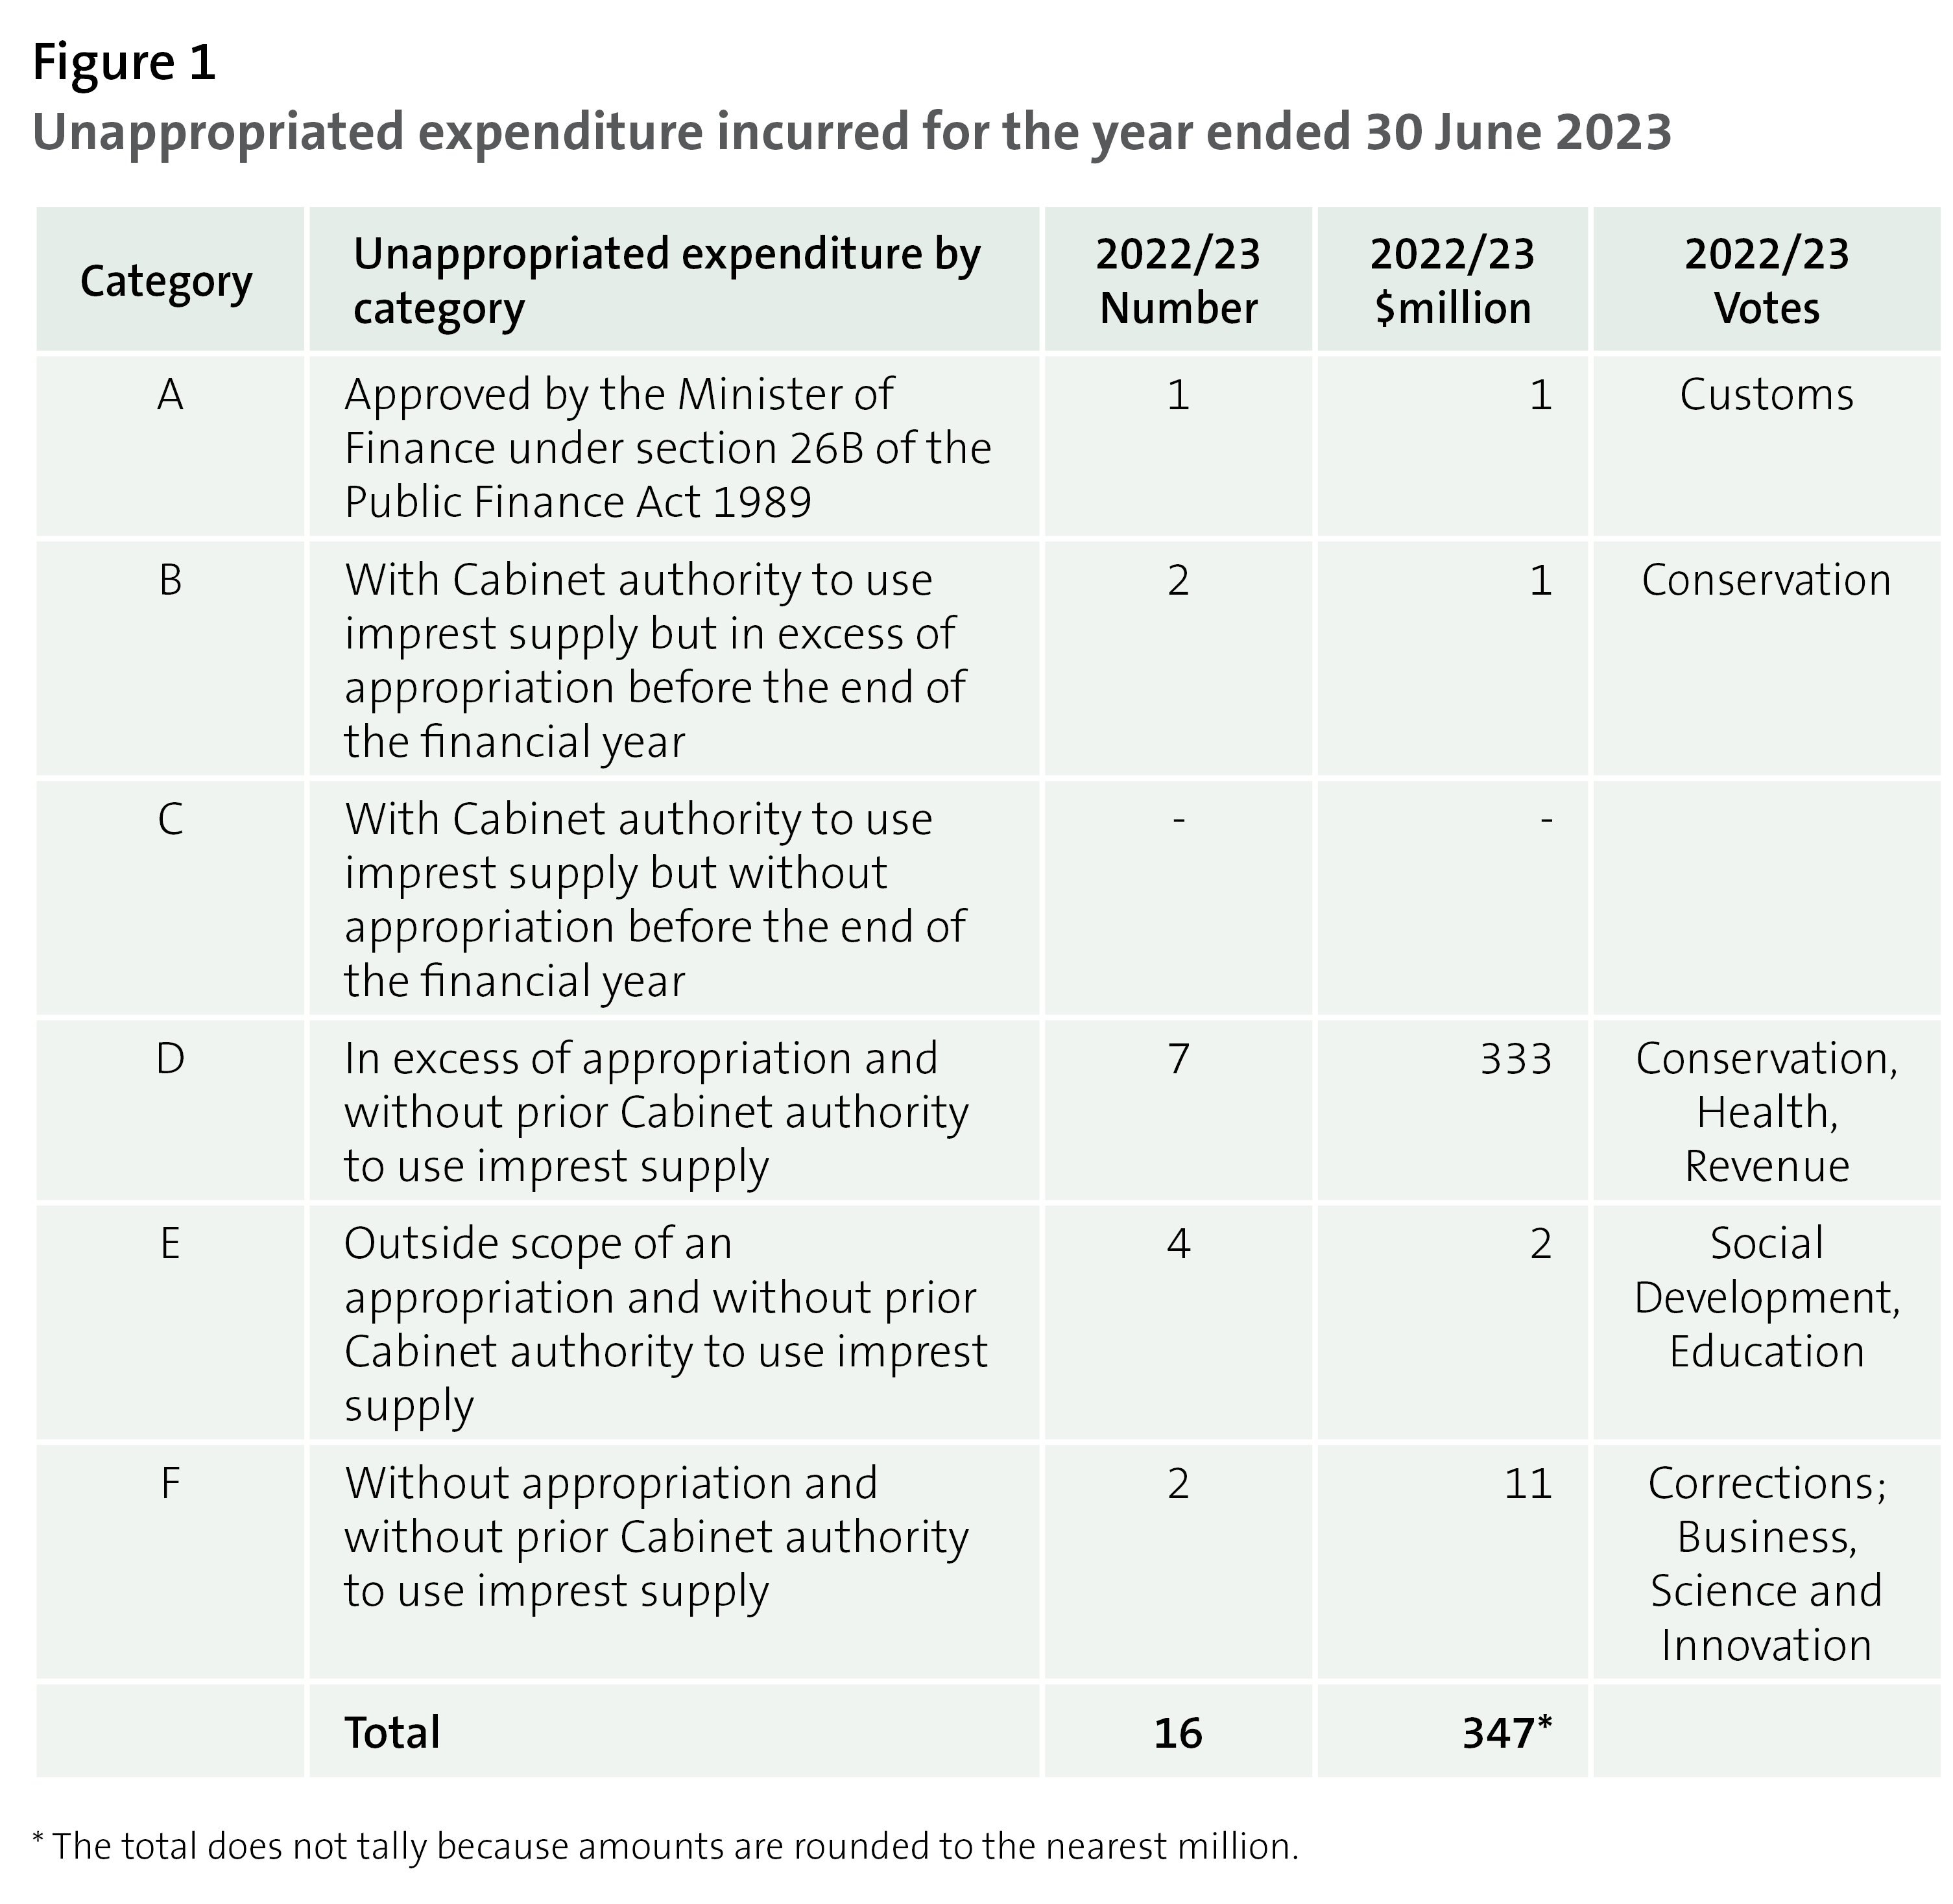 Figure 1 - Unappropriated expenditure incurred for the year ended 30 June 2023